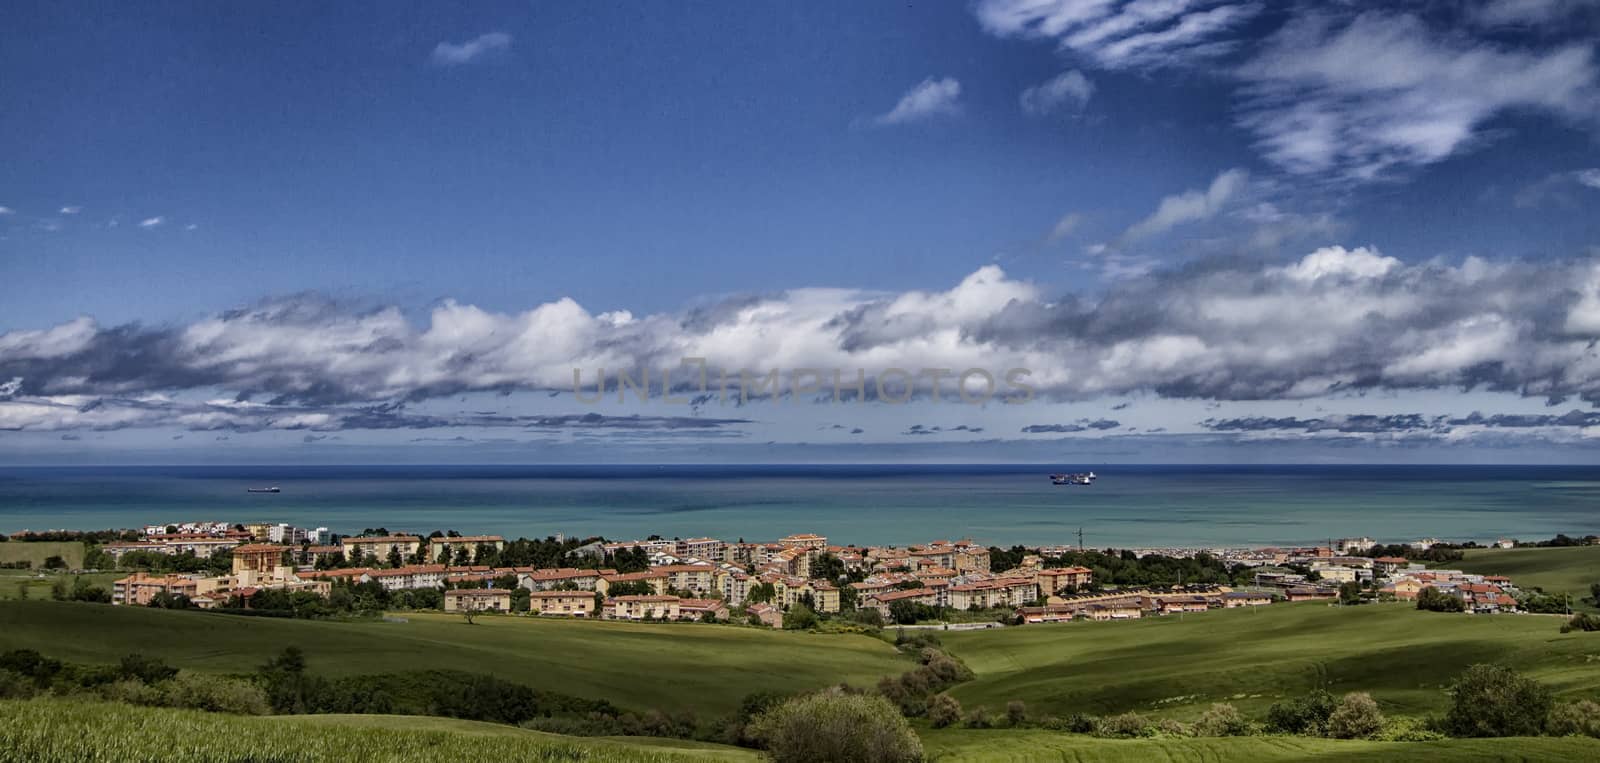 italy villages at the seaside by mariephotos